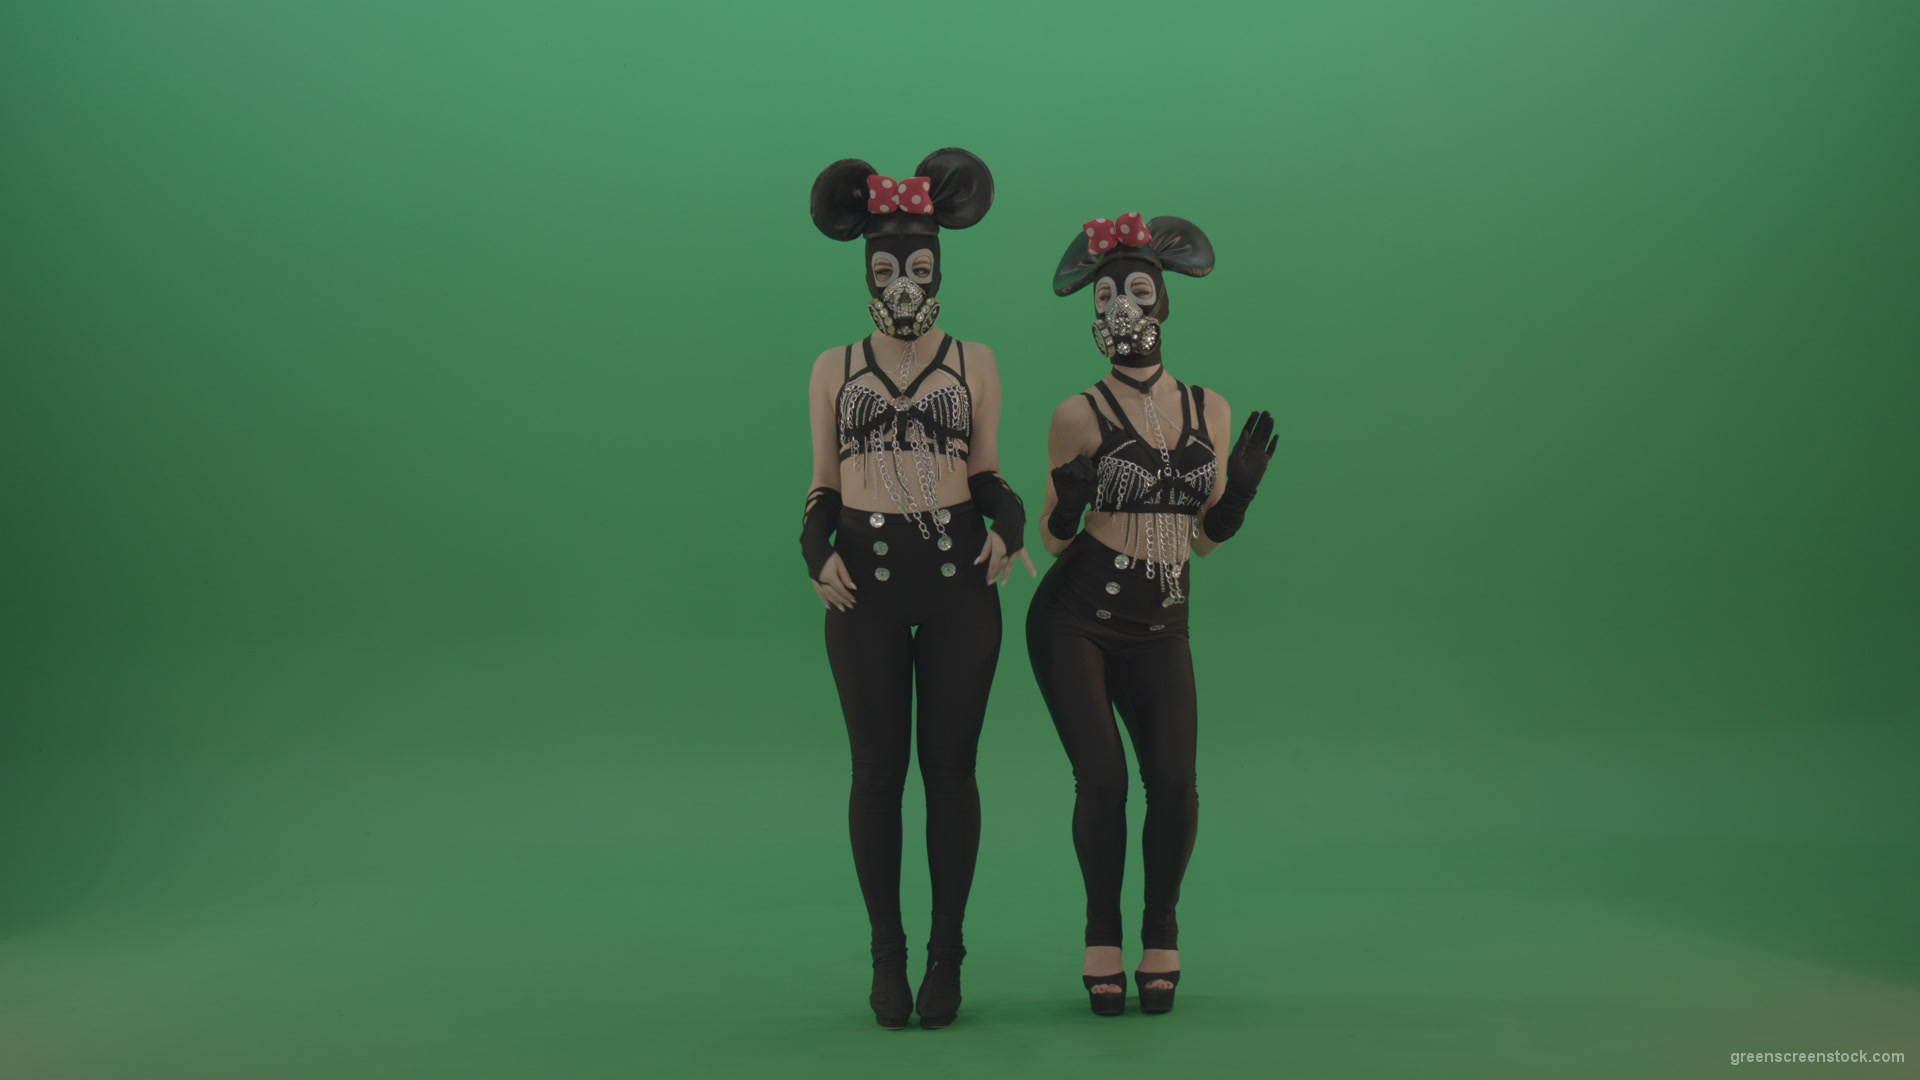 Two-girls-dressed-in-Mickey-Mouse-sit-squarelyon-green-screen_009 Green Screen Stock